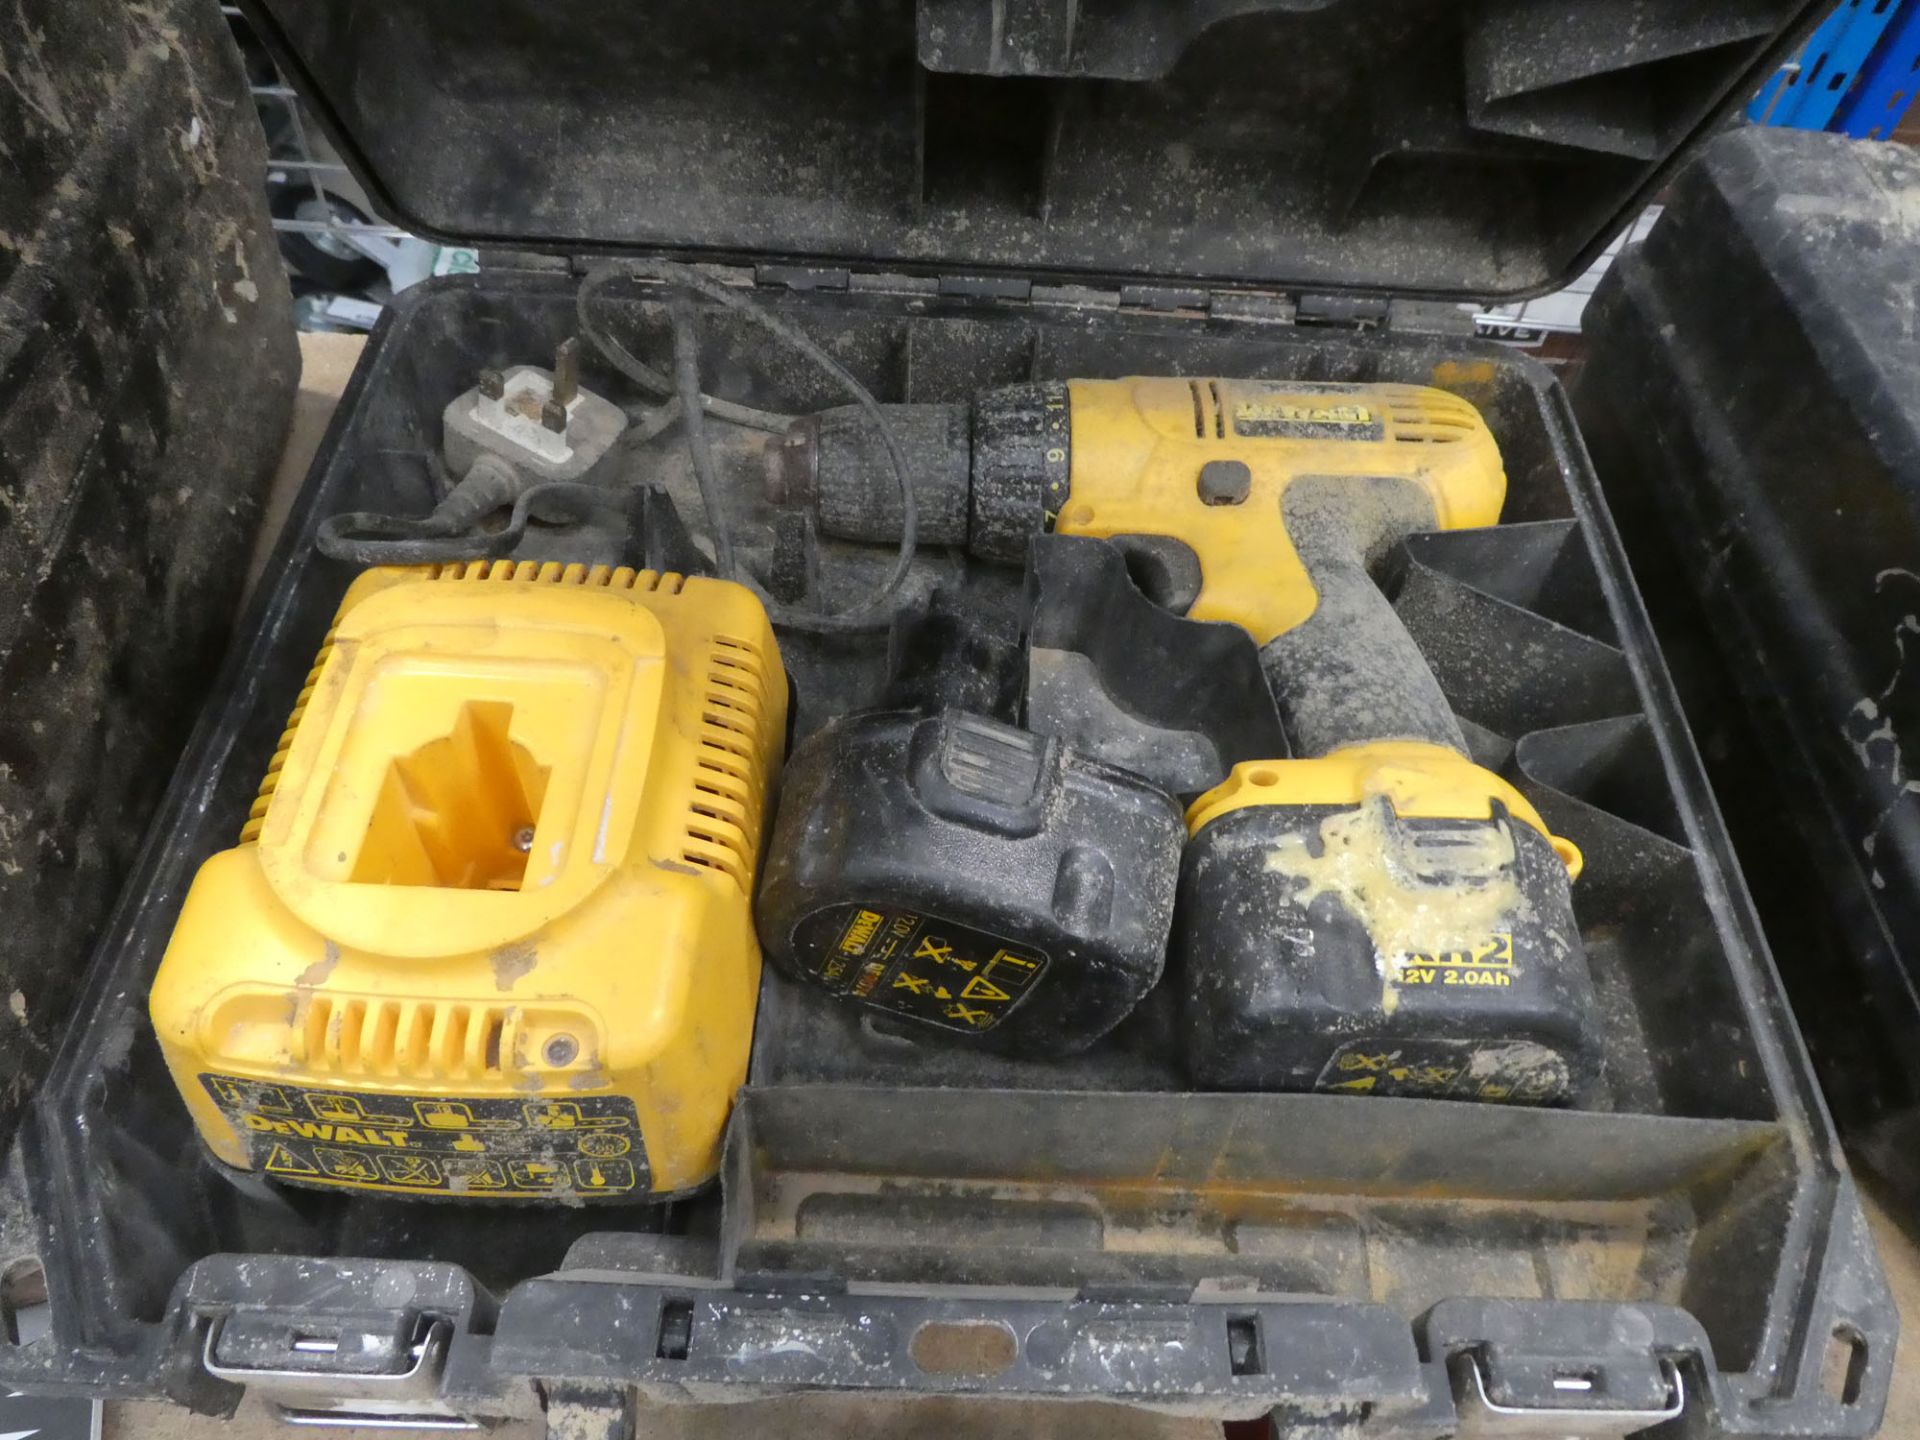 DeWalt cordless drill with two batteries and a charger